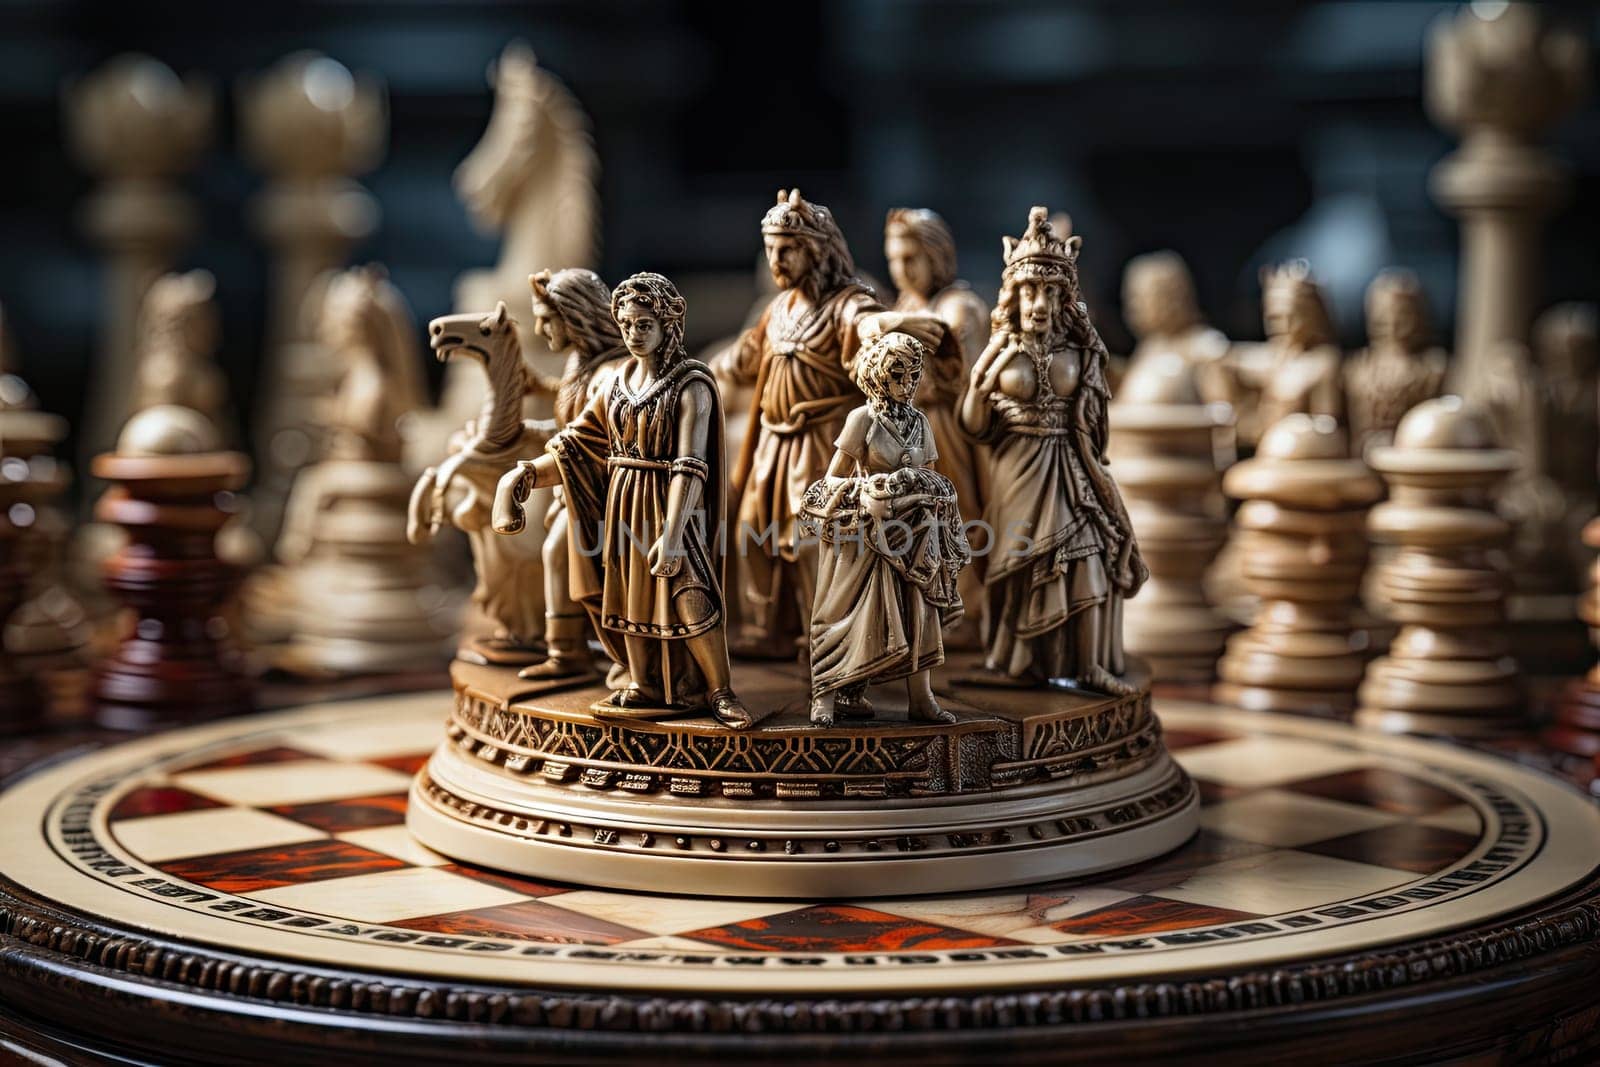 The Royal Game: A Majestic Chess Board with a Glittering Golden Crown Created With Generative AI Technology